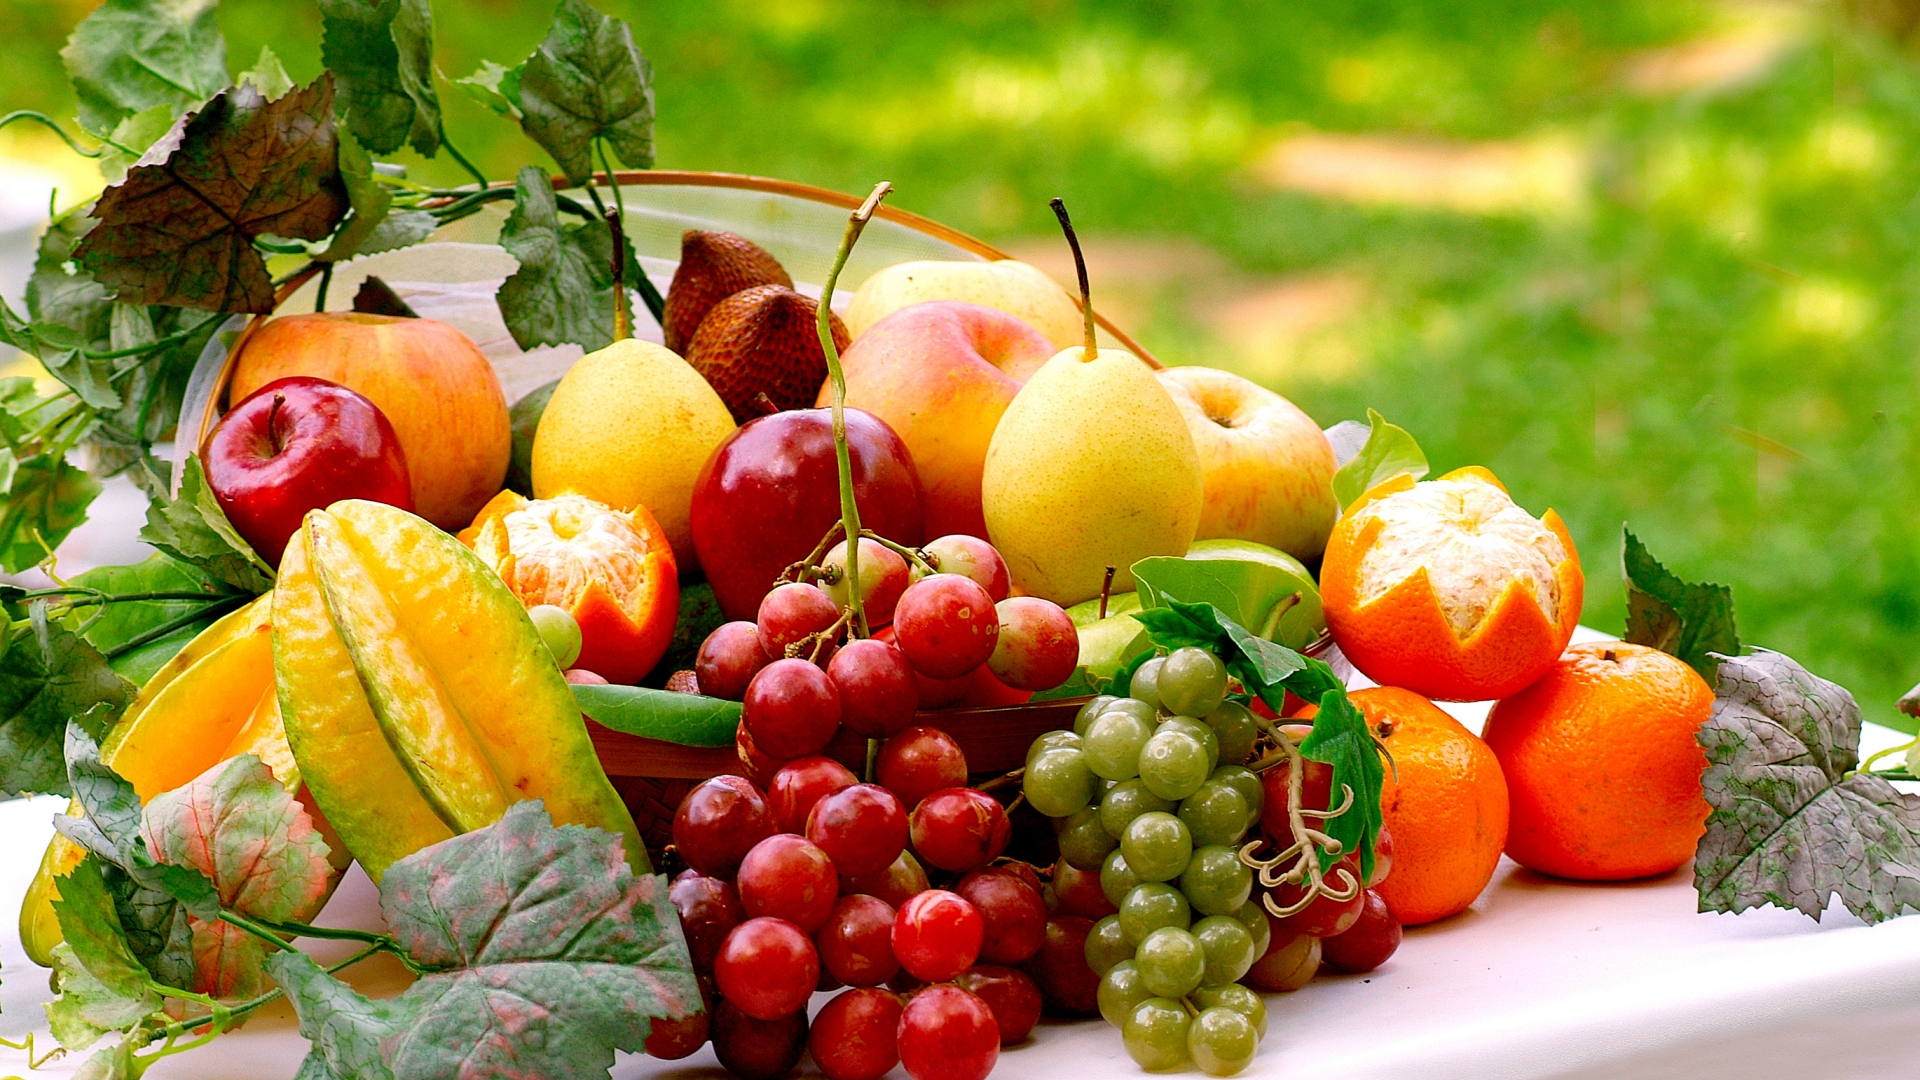 Foods For Healthy Life - Best Fruits - 1920x1080 Wallpaper 